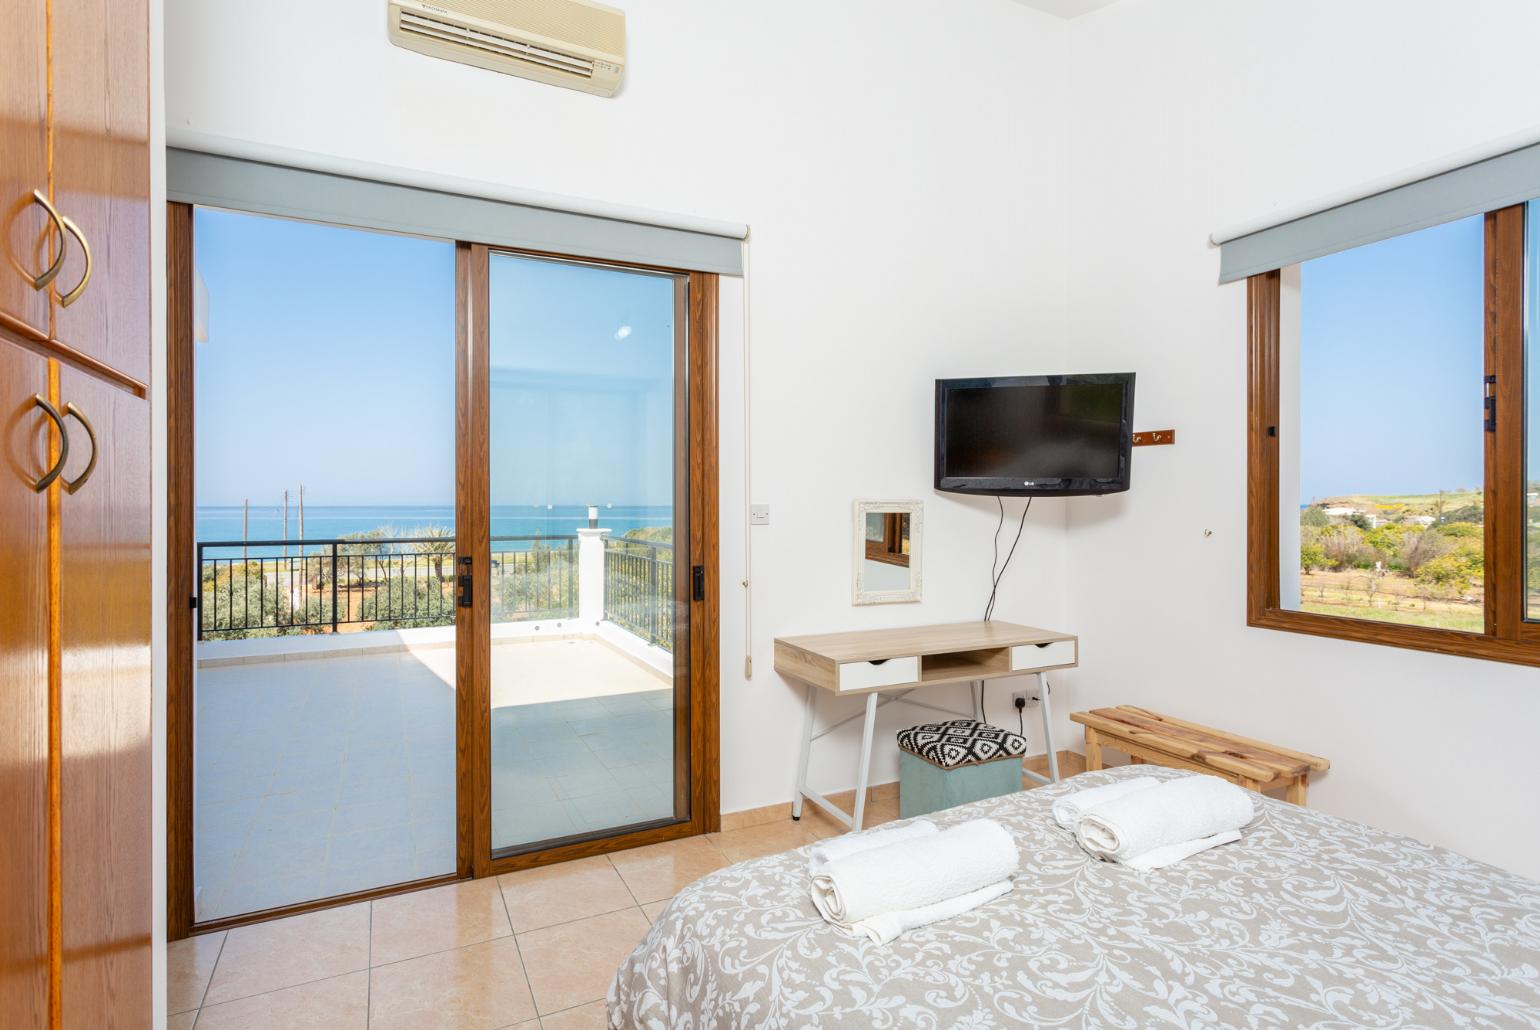 Double bedroom with en suite bathroom, A/C, TV, and upper terrace access with sea views